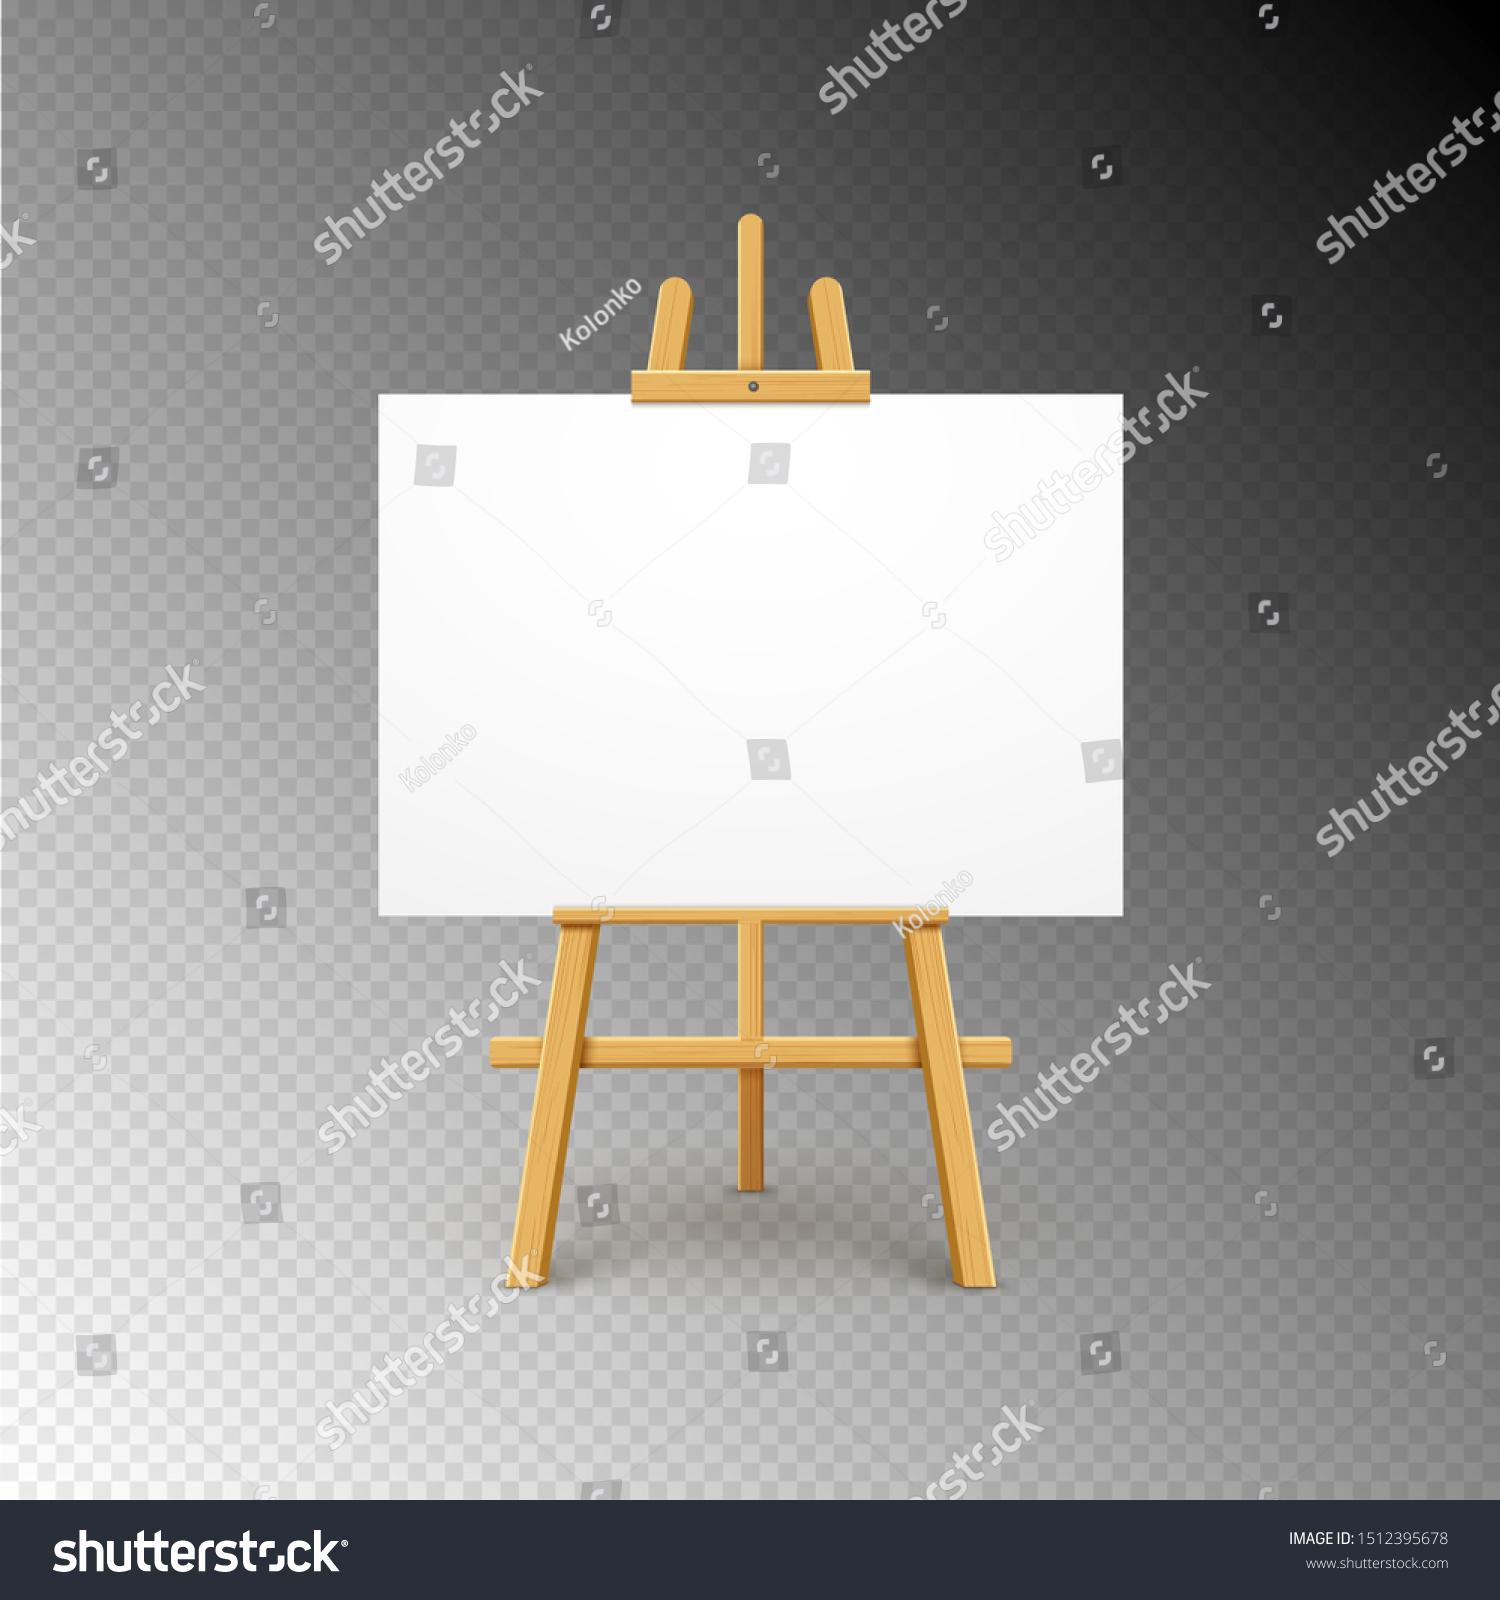 How To Build A Kid S Art Easel Diy